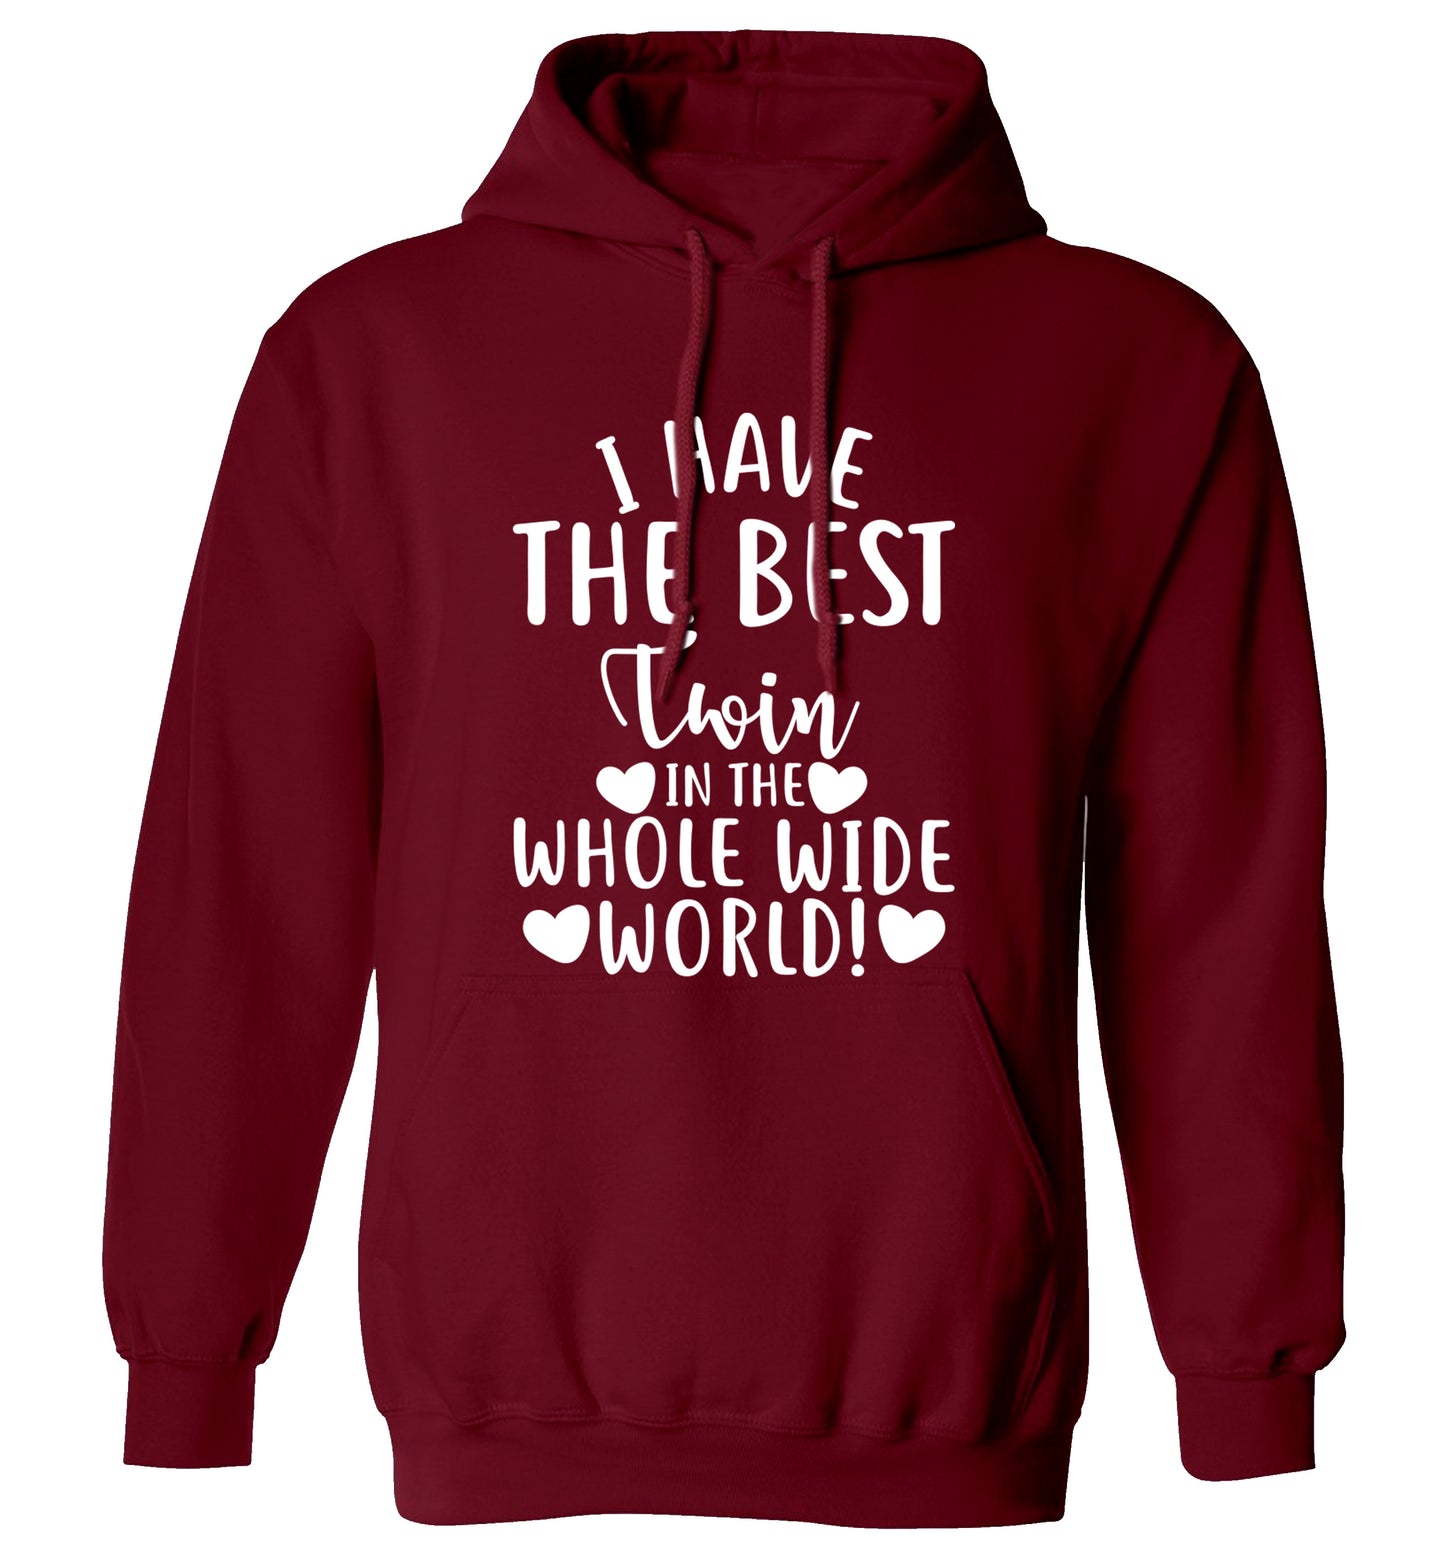 I have the best twin in the whole wide world! adults unisex maroon hoodie 2XL